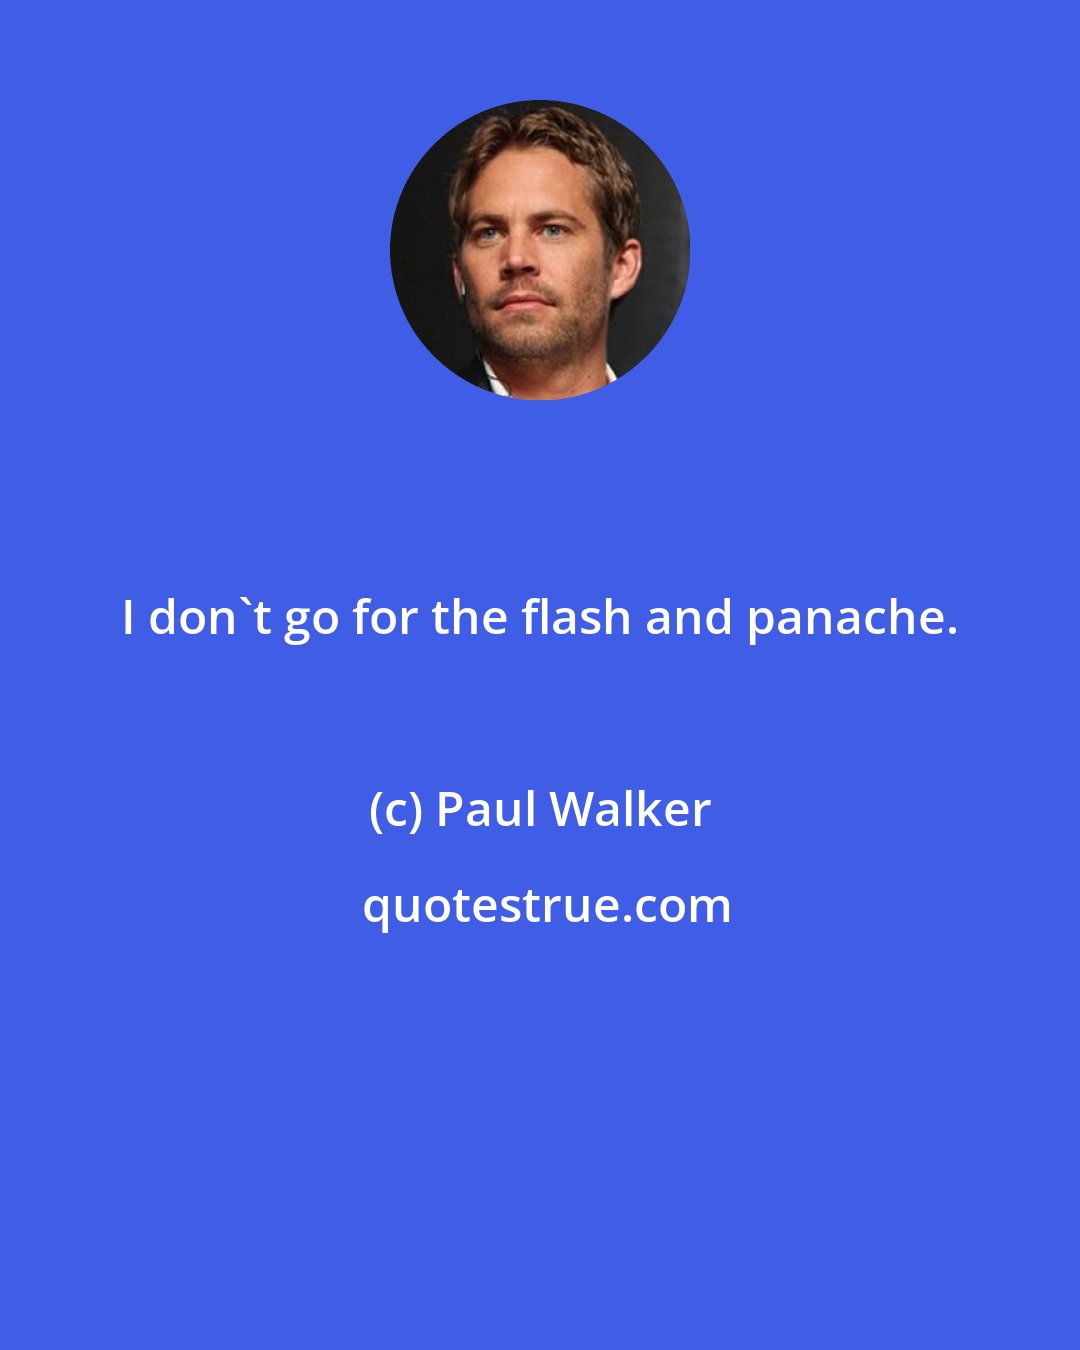 Paul Walker: I don't go for the flash and panache.